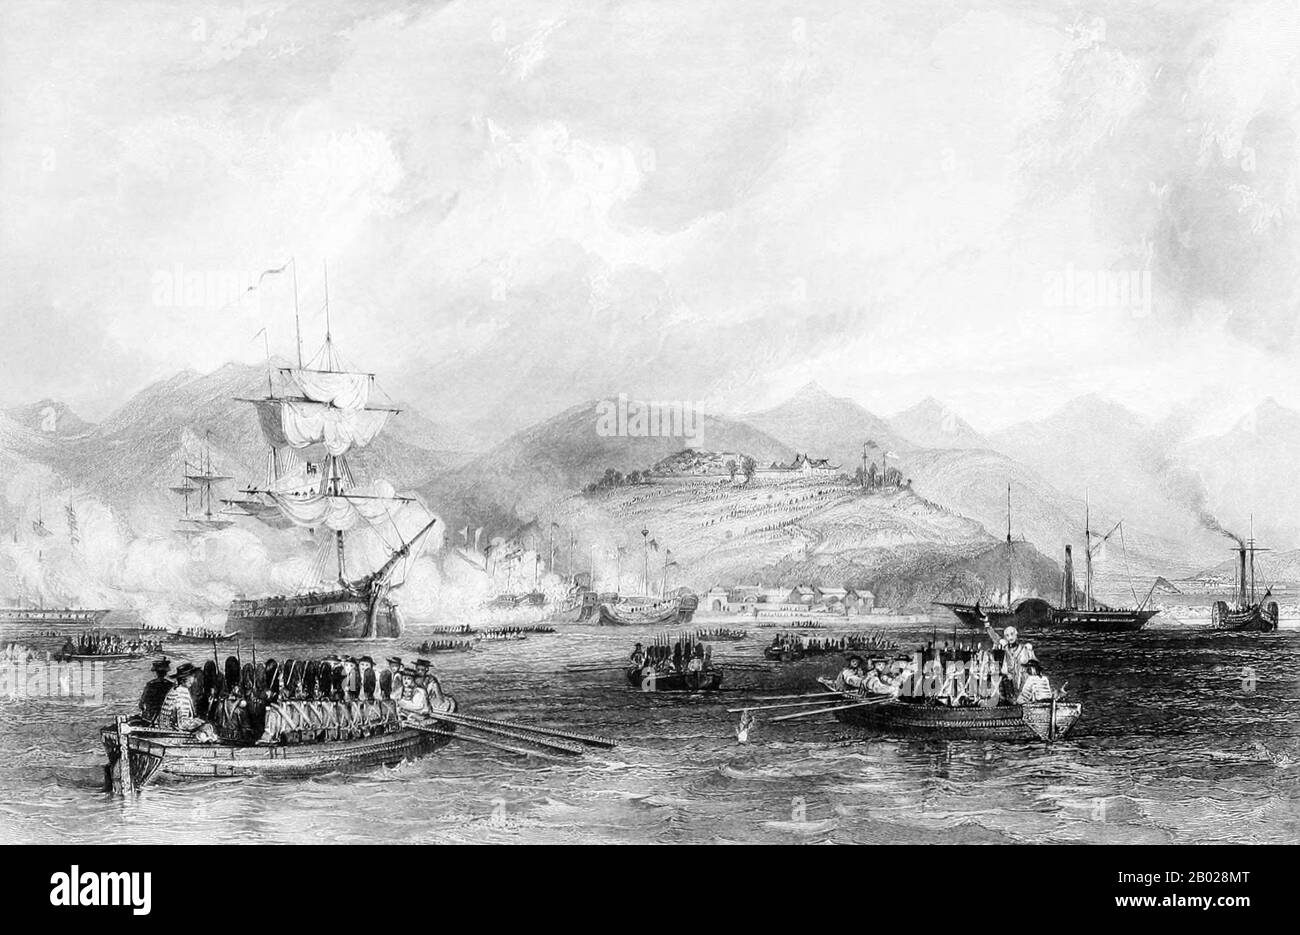 The first capture of Chusan by British forces in China occurred on 5–6 July 1840 during the First Opium War. The British captured Chusan, the largest island of an archipelago of that name.  The First Anglo-Chinese War (1839–42), known popularly as the First Opium War or simply the Opium War, was fought between the United Kingdom and the Qing Dynasty of China over their conflicting viewpoints on diplomatic relations, trade, and the administration of justice.  Chinese officials wished to stop what was perceived as an outflow of silver and to control the spread of opium, and confiscated supplies Stock Photo